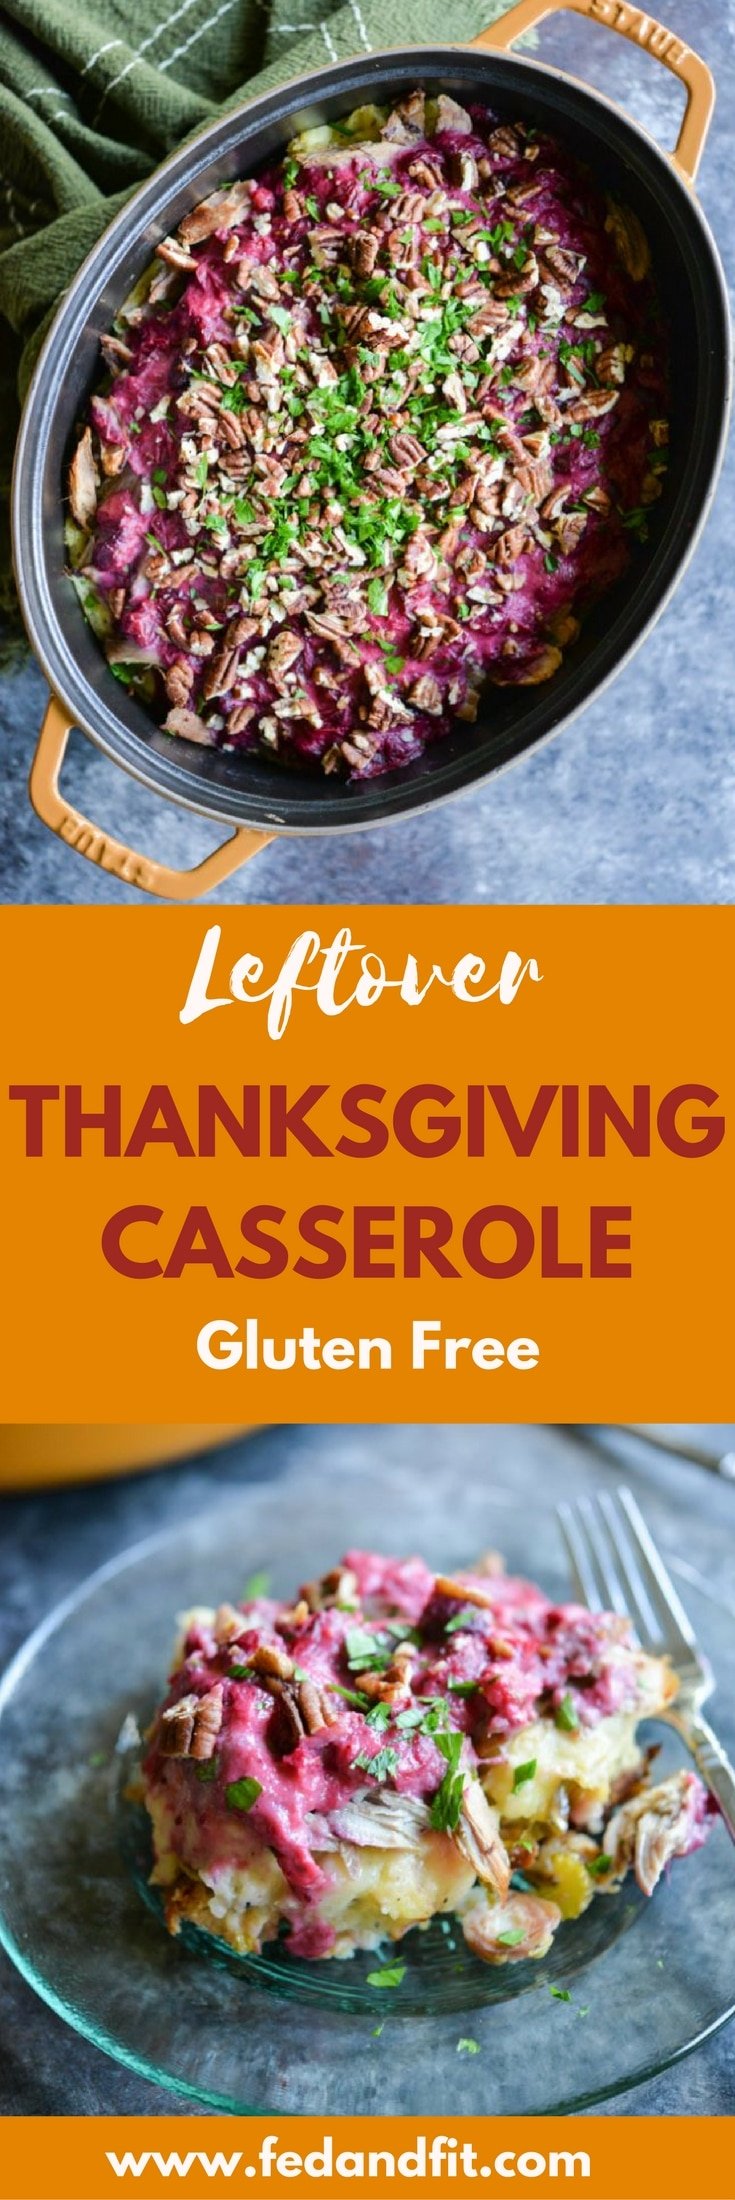 Make great use of your Thanksgiving leftovers with this simple and delicious casserole! It's delicious and SO EASY.